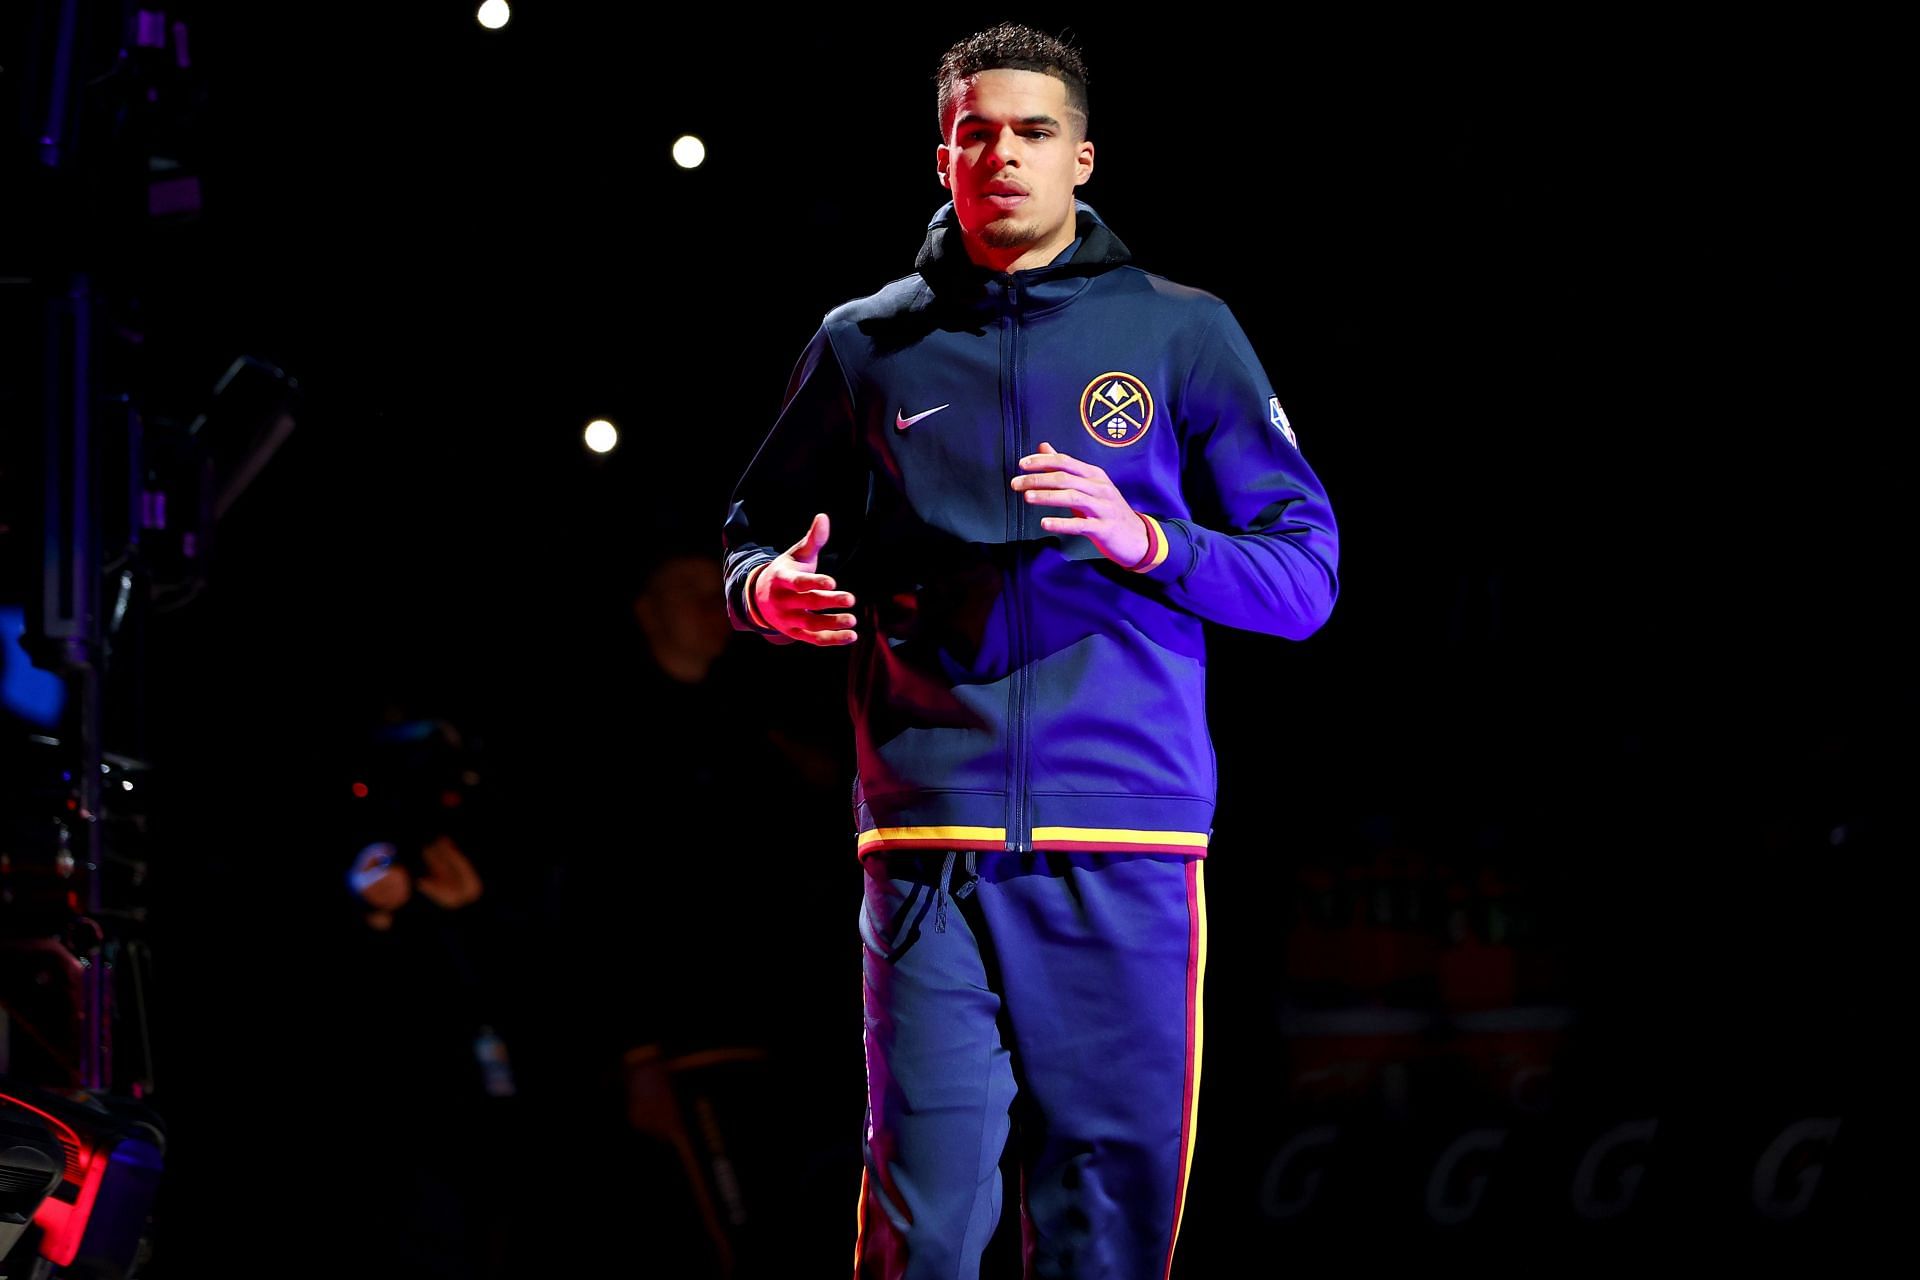 Denver Nuggets forward Michael Porter Jr. is out for the year